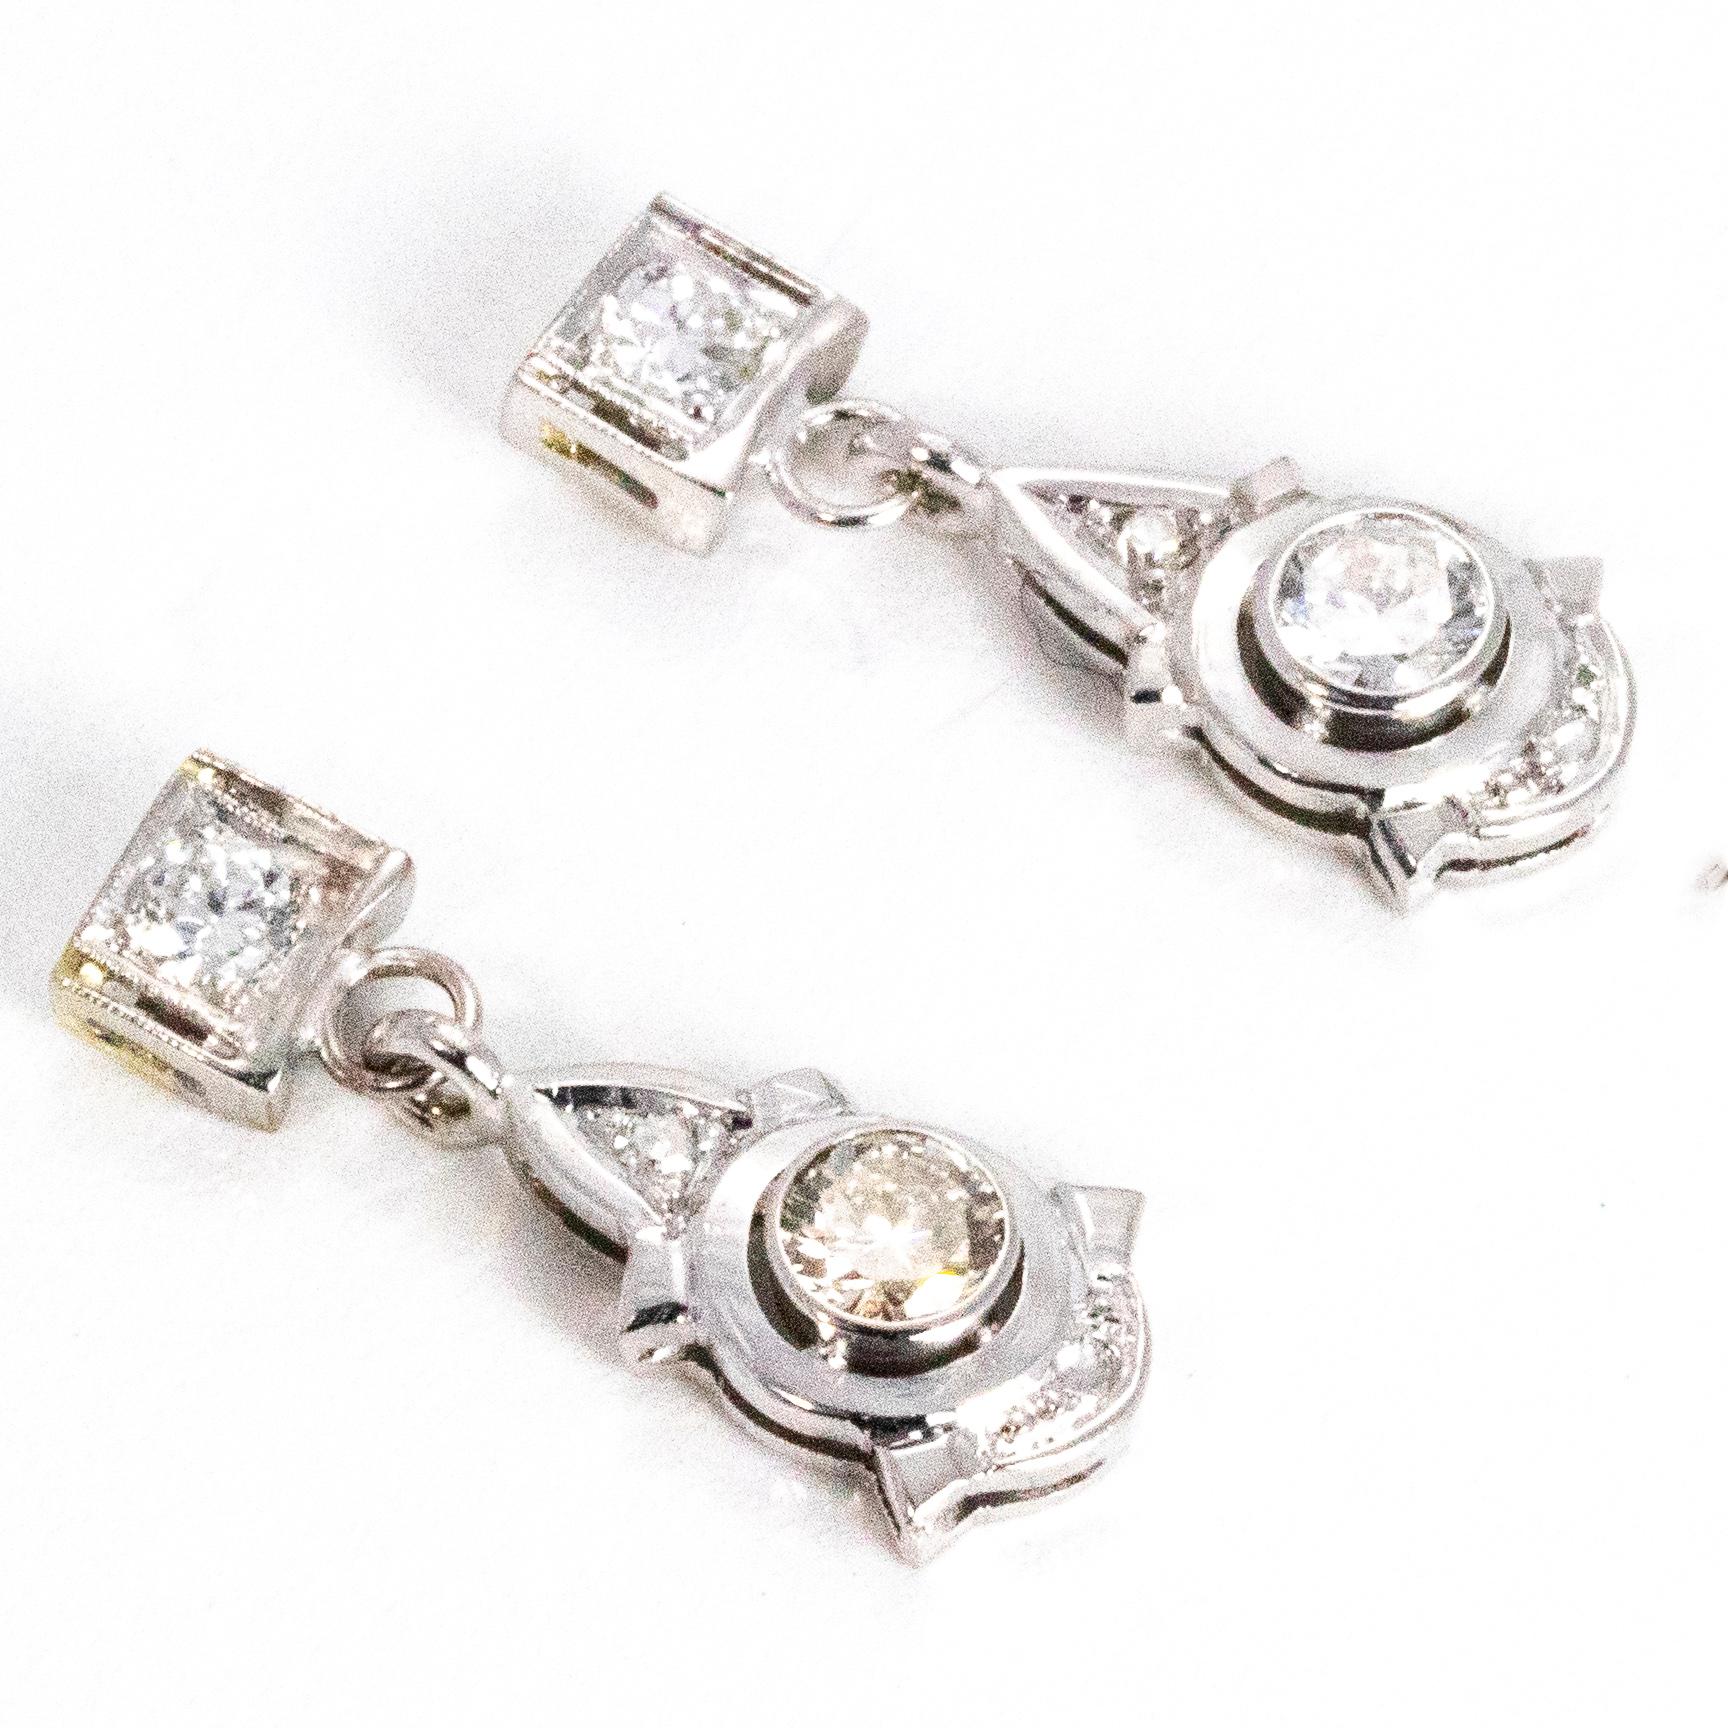 These stunning drop earrings boast a total of 40pts worth of diamonds on each earring. The diamond on the stud measures 15pts and the diamond on the lower drop is 25pts. The style of these earrings are slightly art deco and boast so much